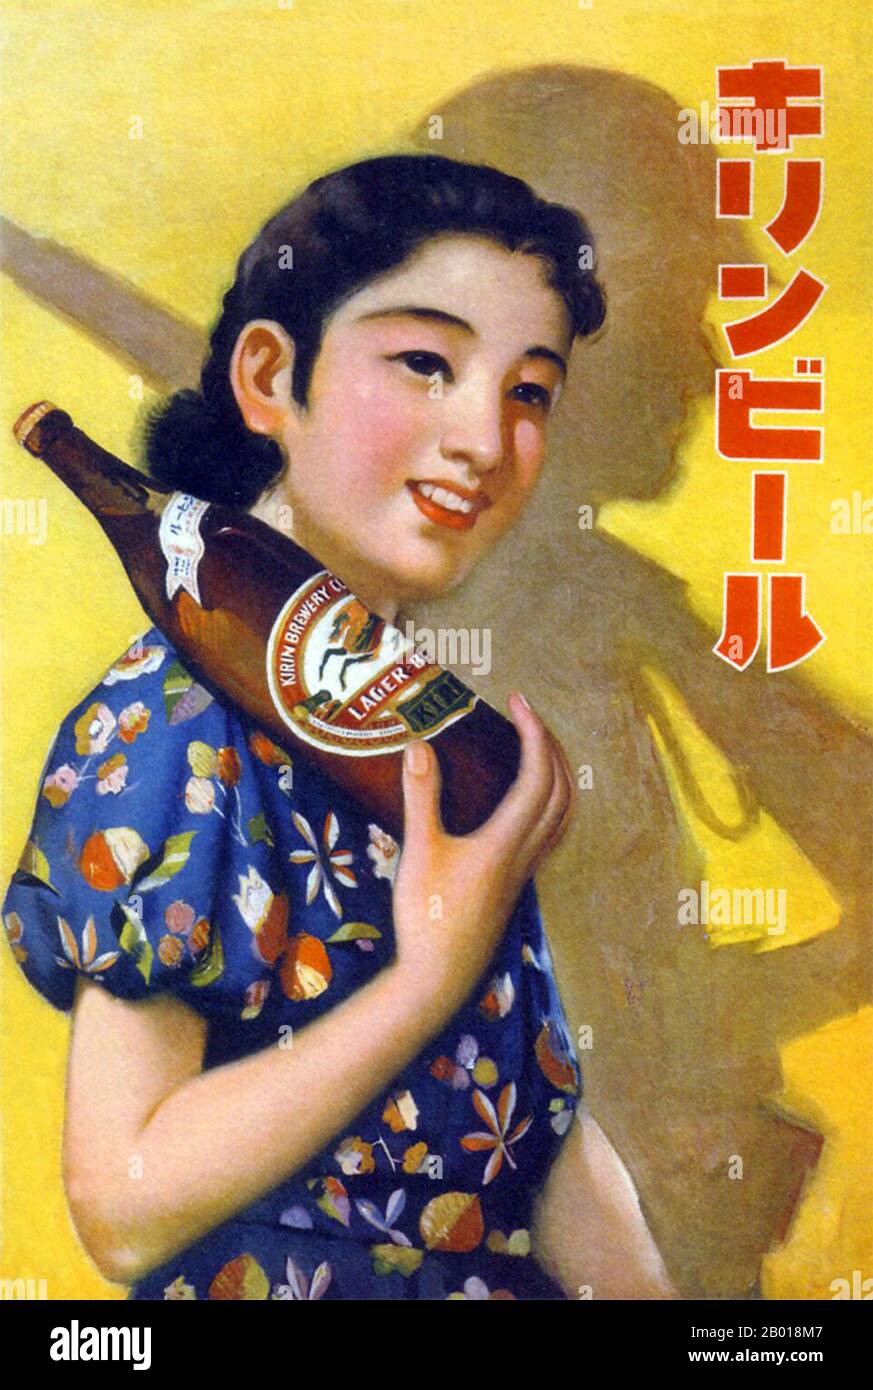 Japan: Advertising poster for Kirin Beer, 1939.  A 1939 advertisement for Kirin Beer epitomising the rising tide of militarism and fascism in Japan. An attractive young woman with a bottle of Kirin Beer resting on her shoulder casts the shadow of a Japanese imperial soldier, gun resting on his shoulder. Stock Photo